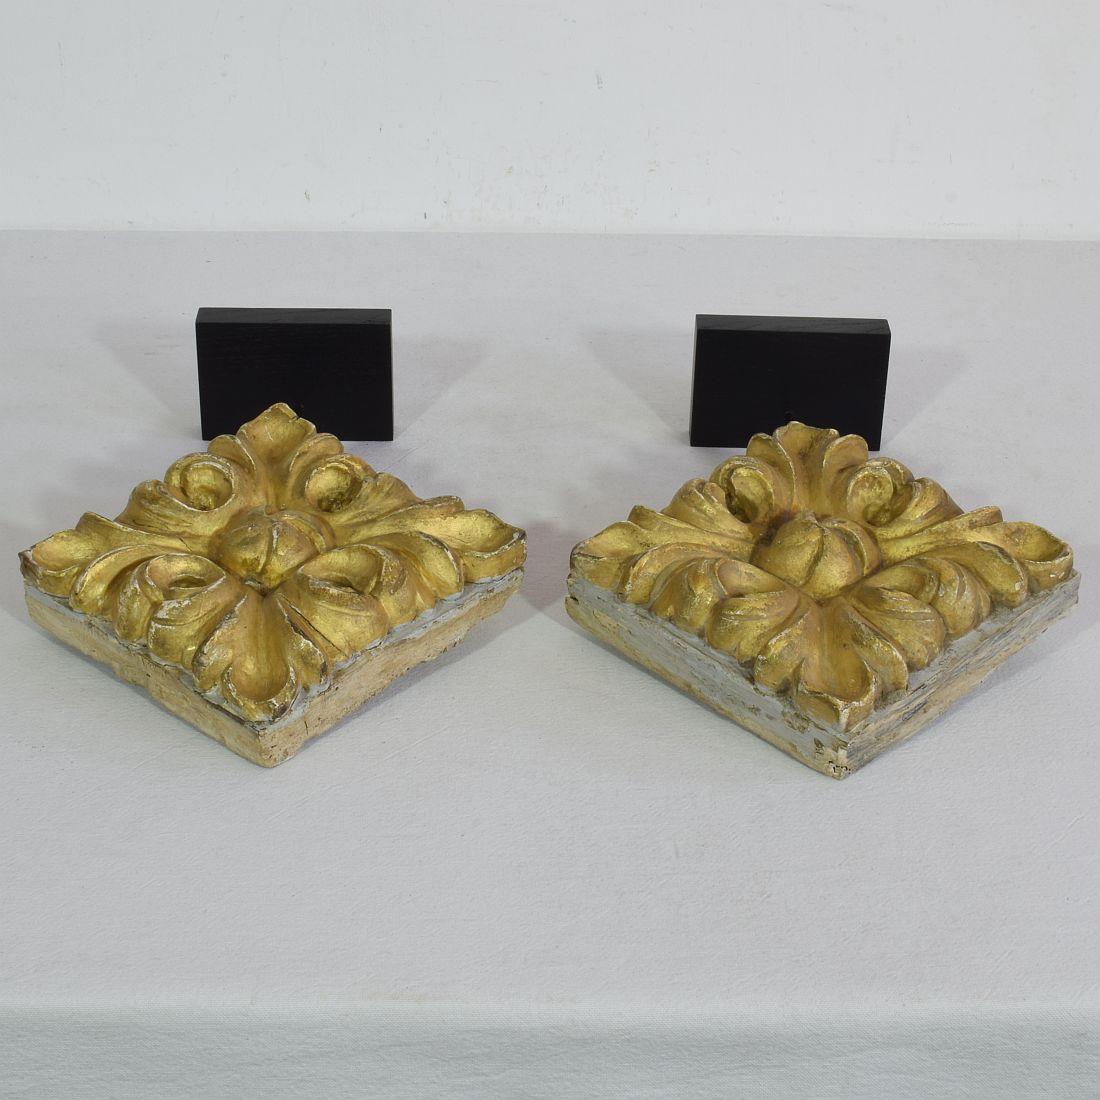 Pair 18th Century Portuguese Neoclassical Giltwood Floral Ornaments 8